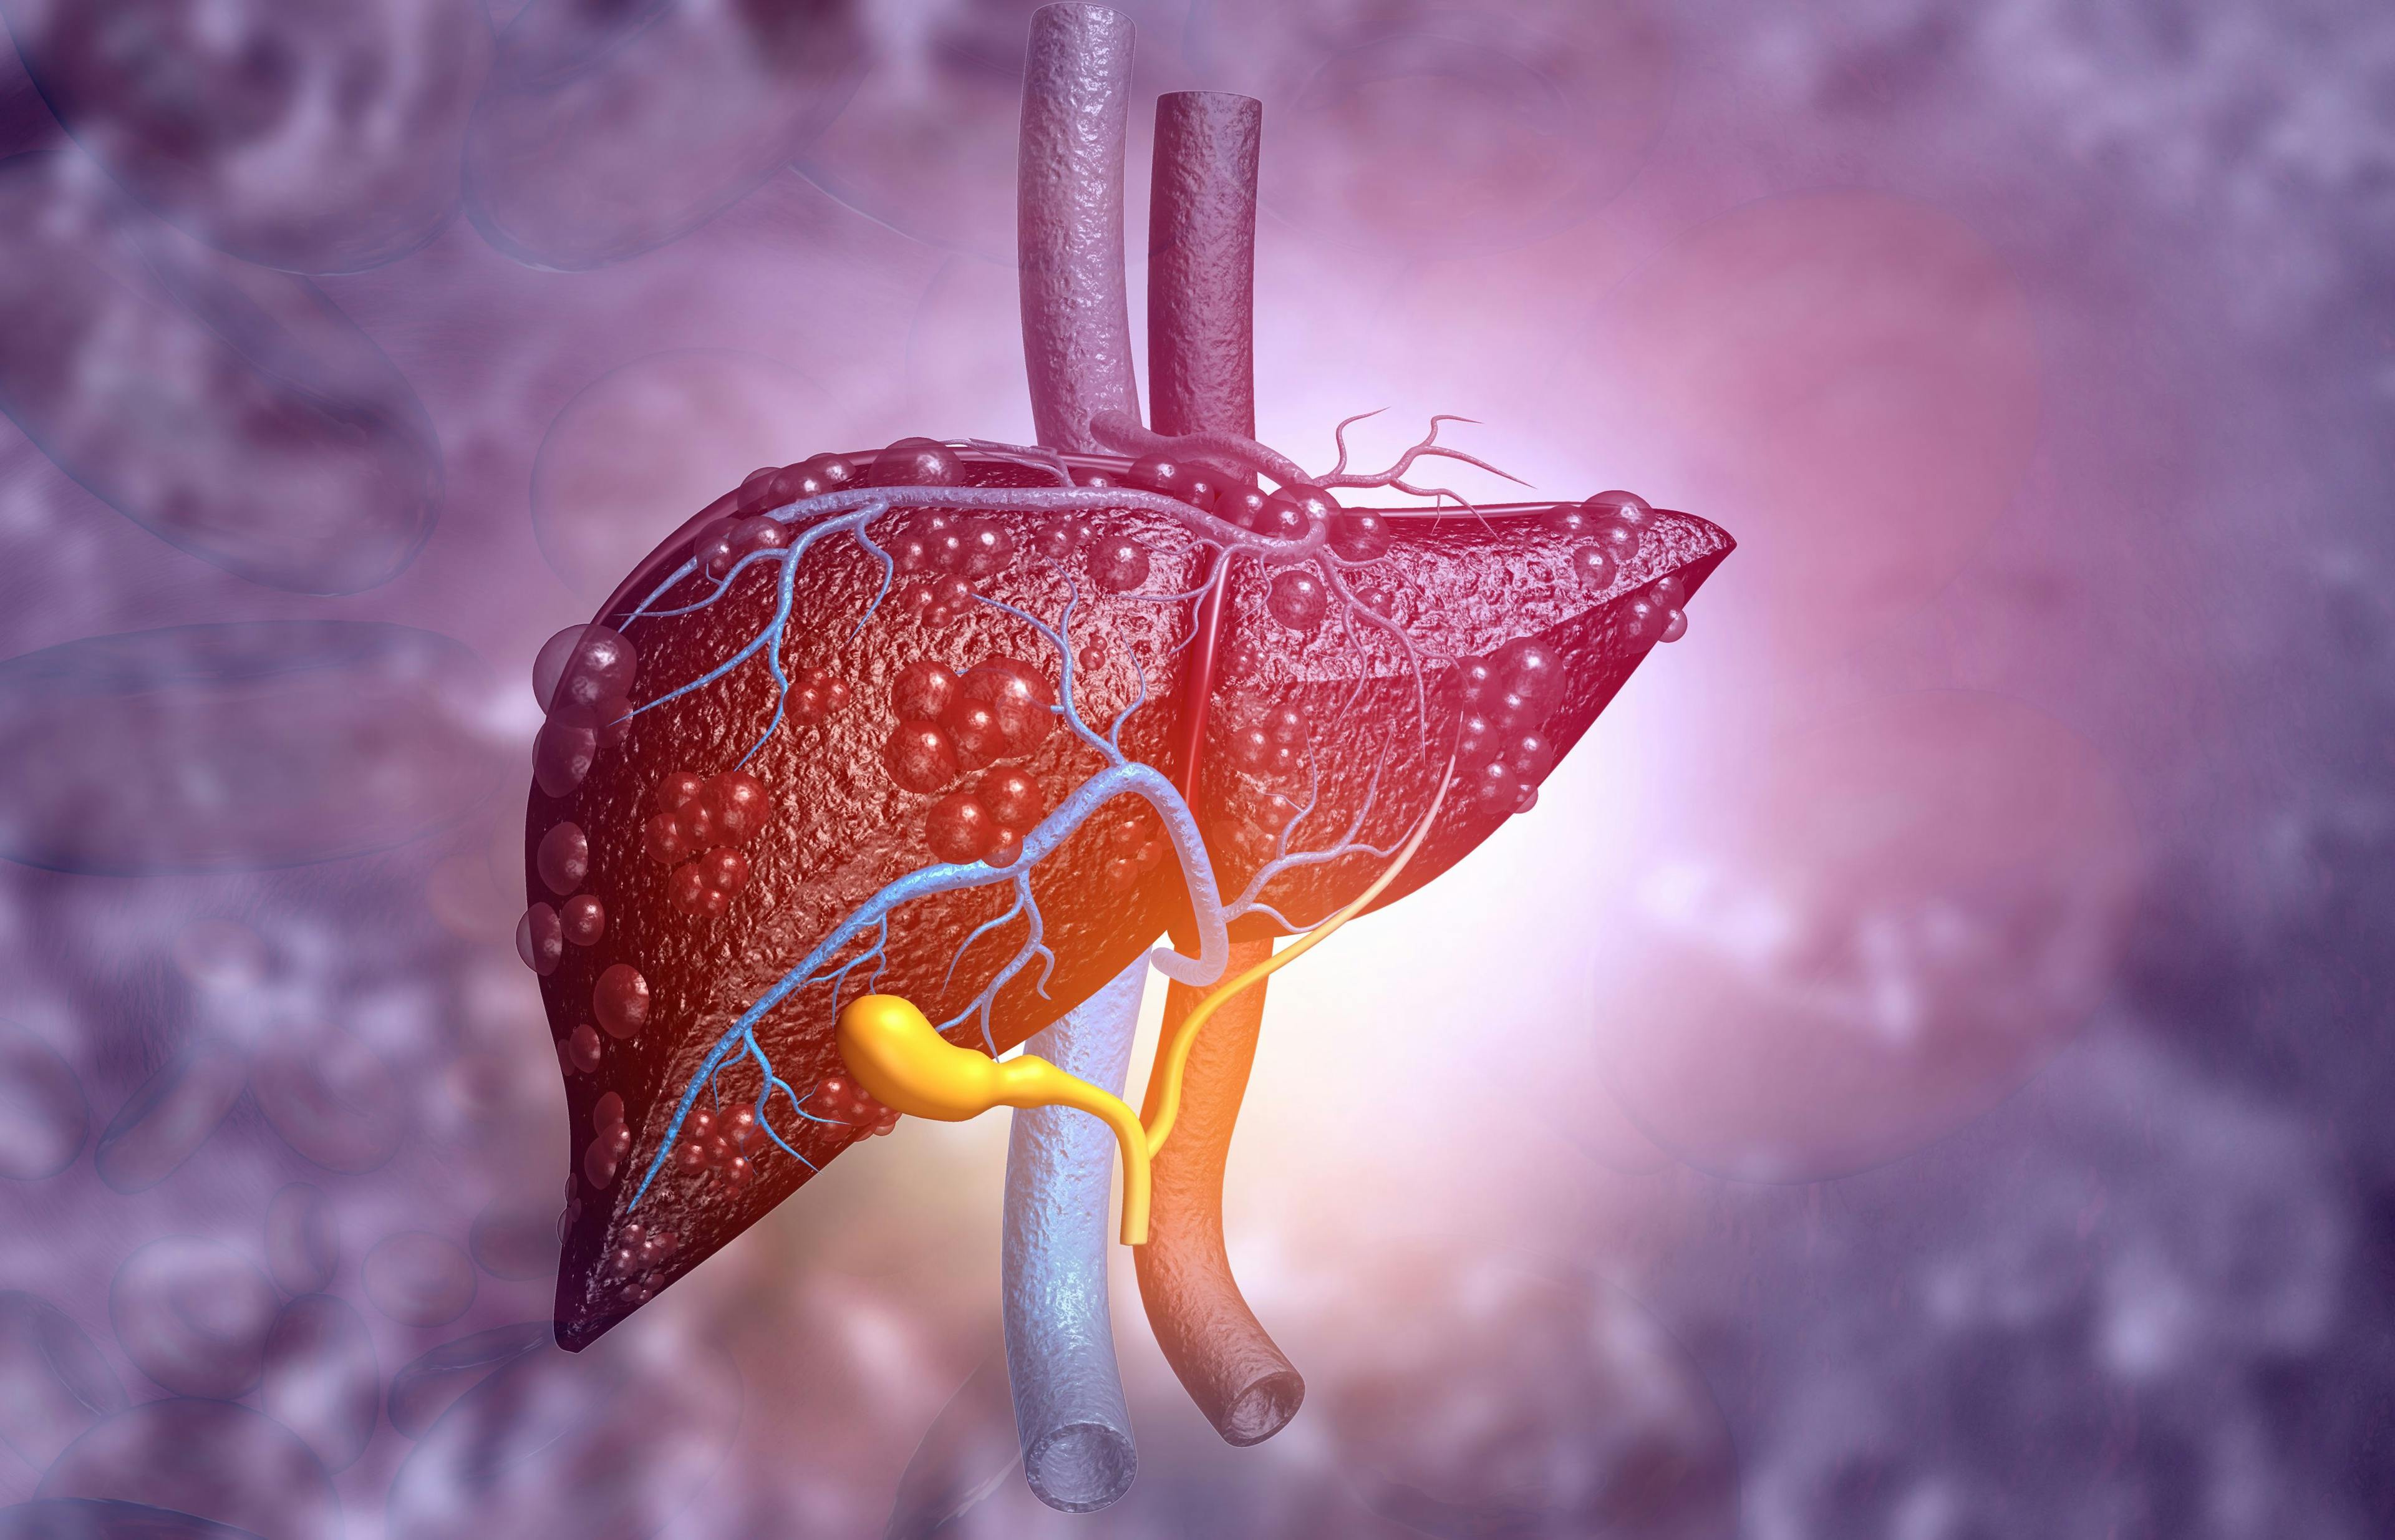 3d illustration of Abstract medical background with Diseased liver - Image credit: Rasi | stock.adobe.com 